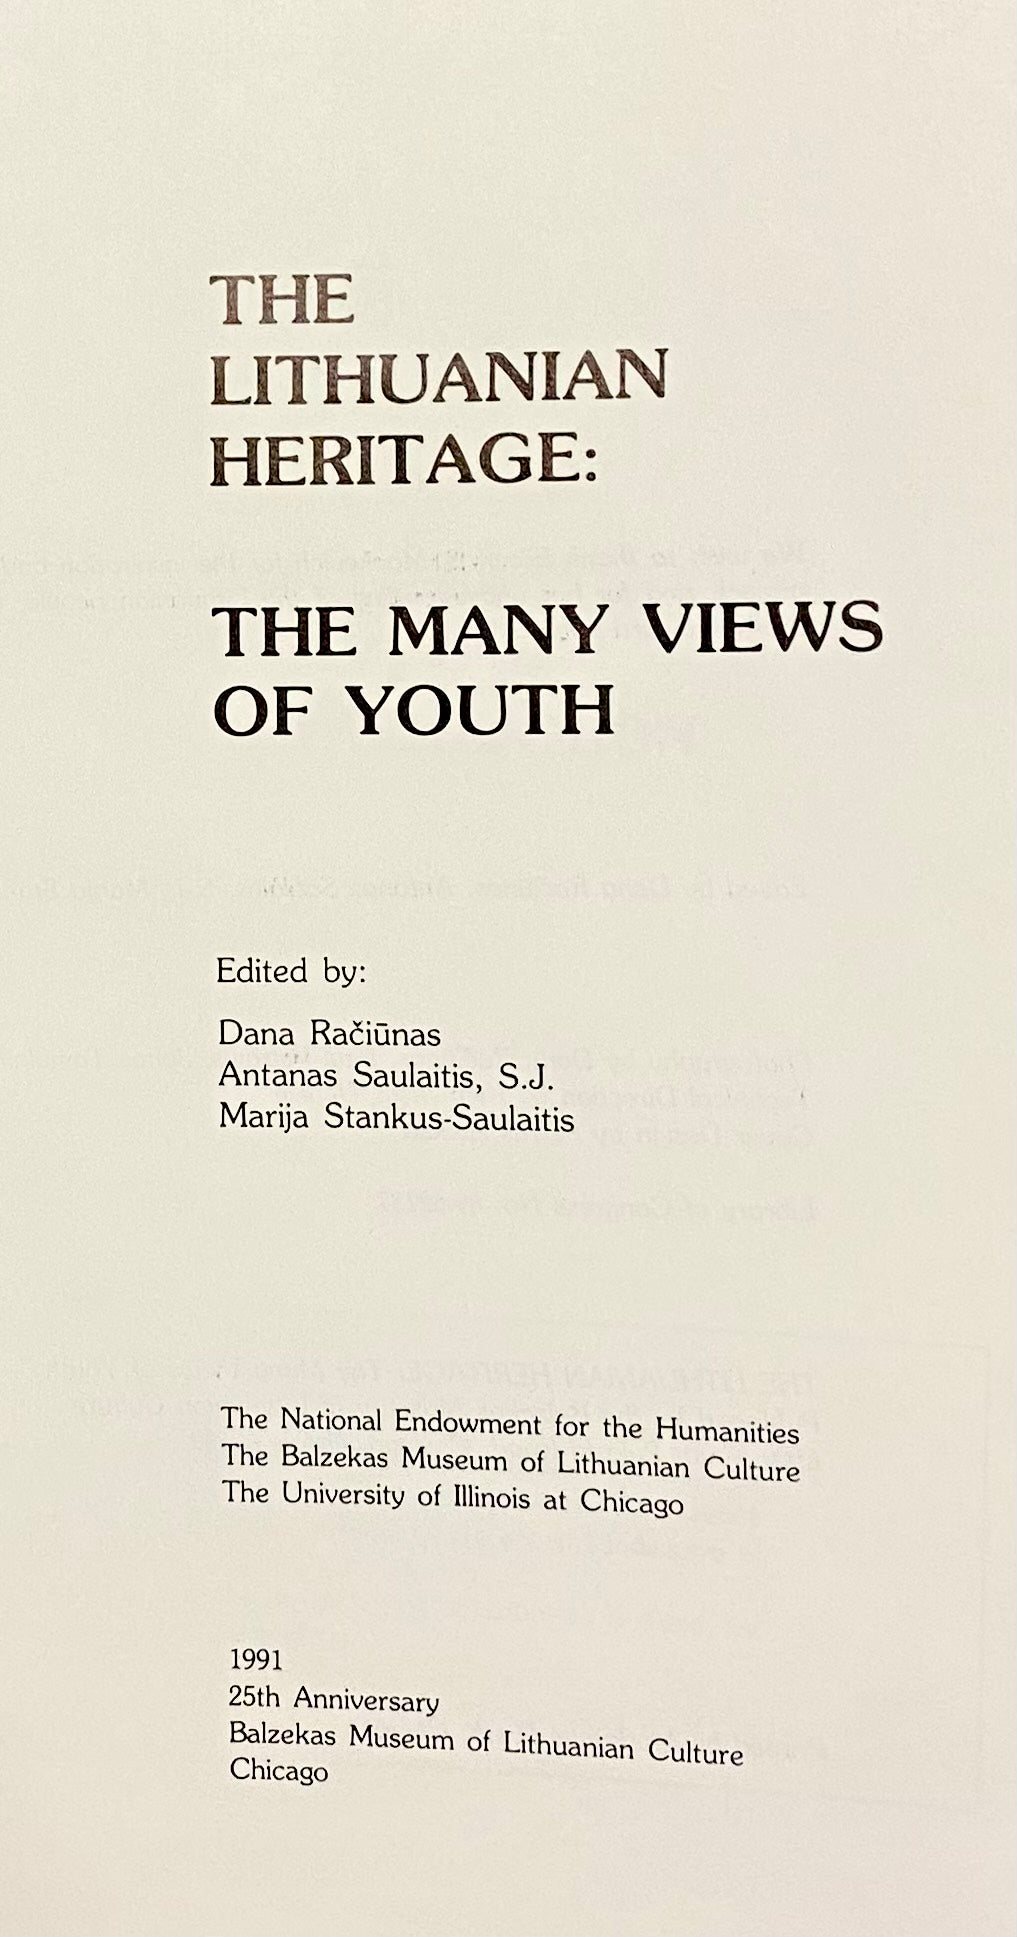 The Lithuanian Heritage: The Many Views of Youth (0031)